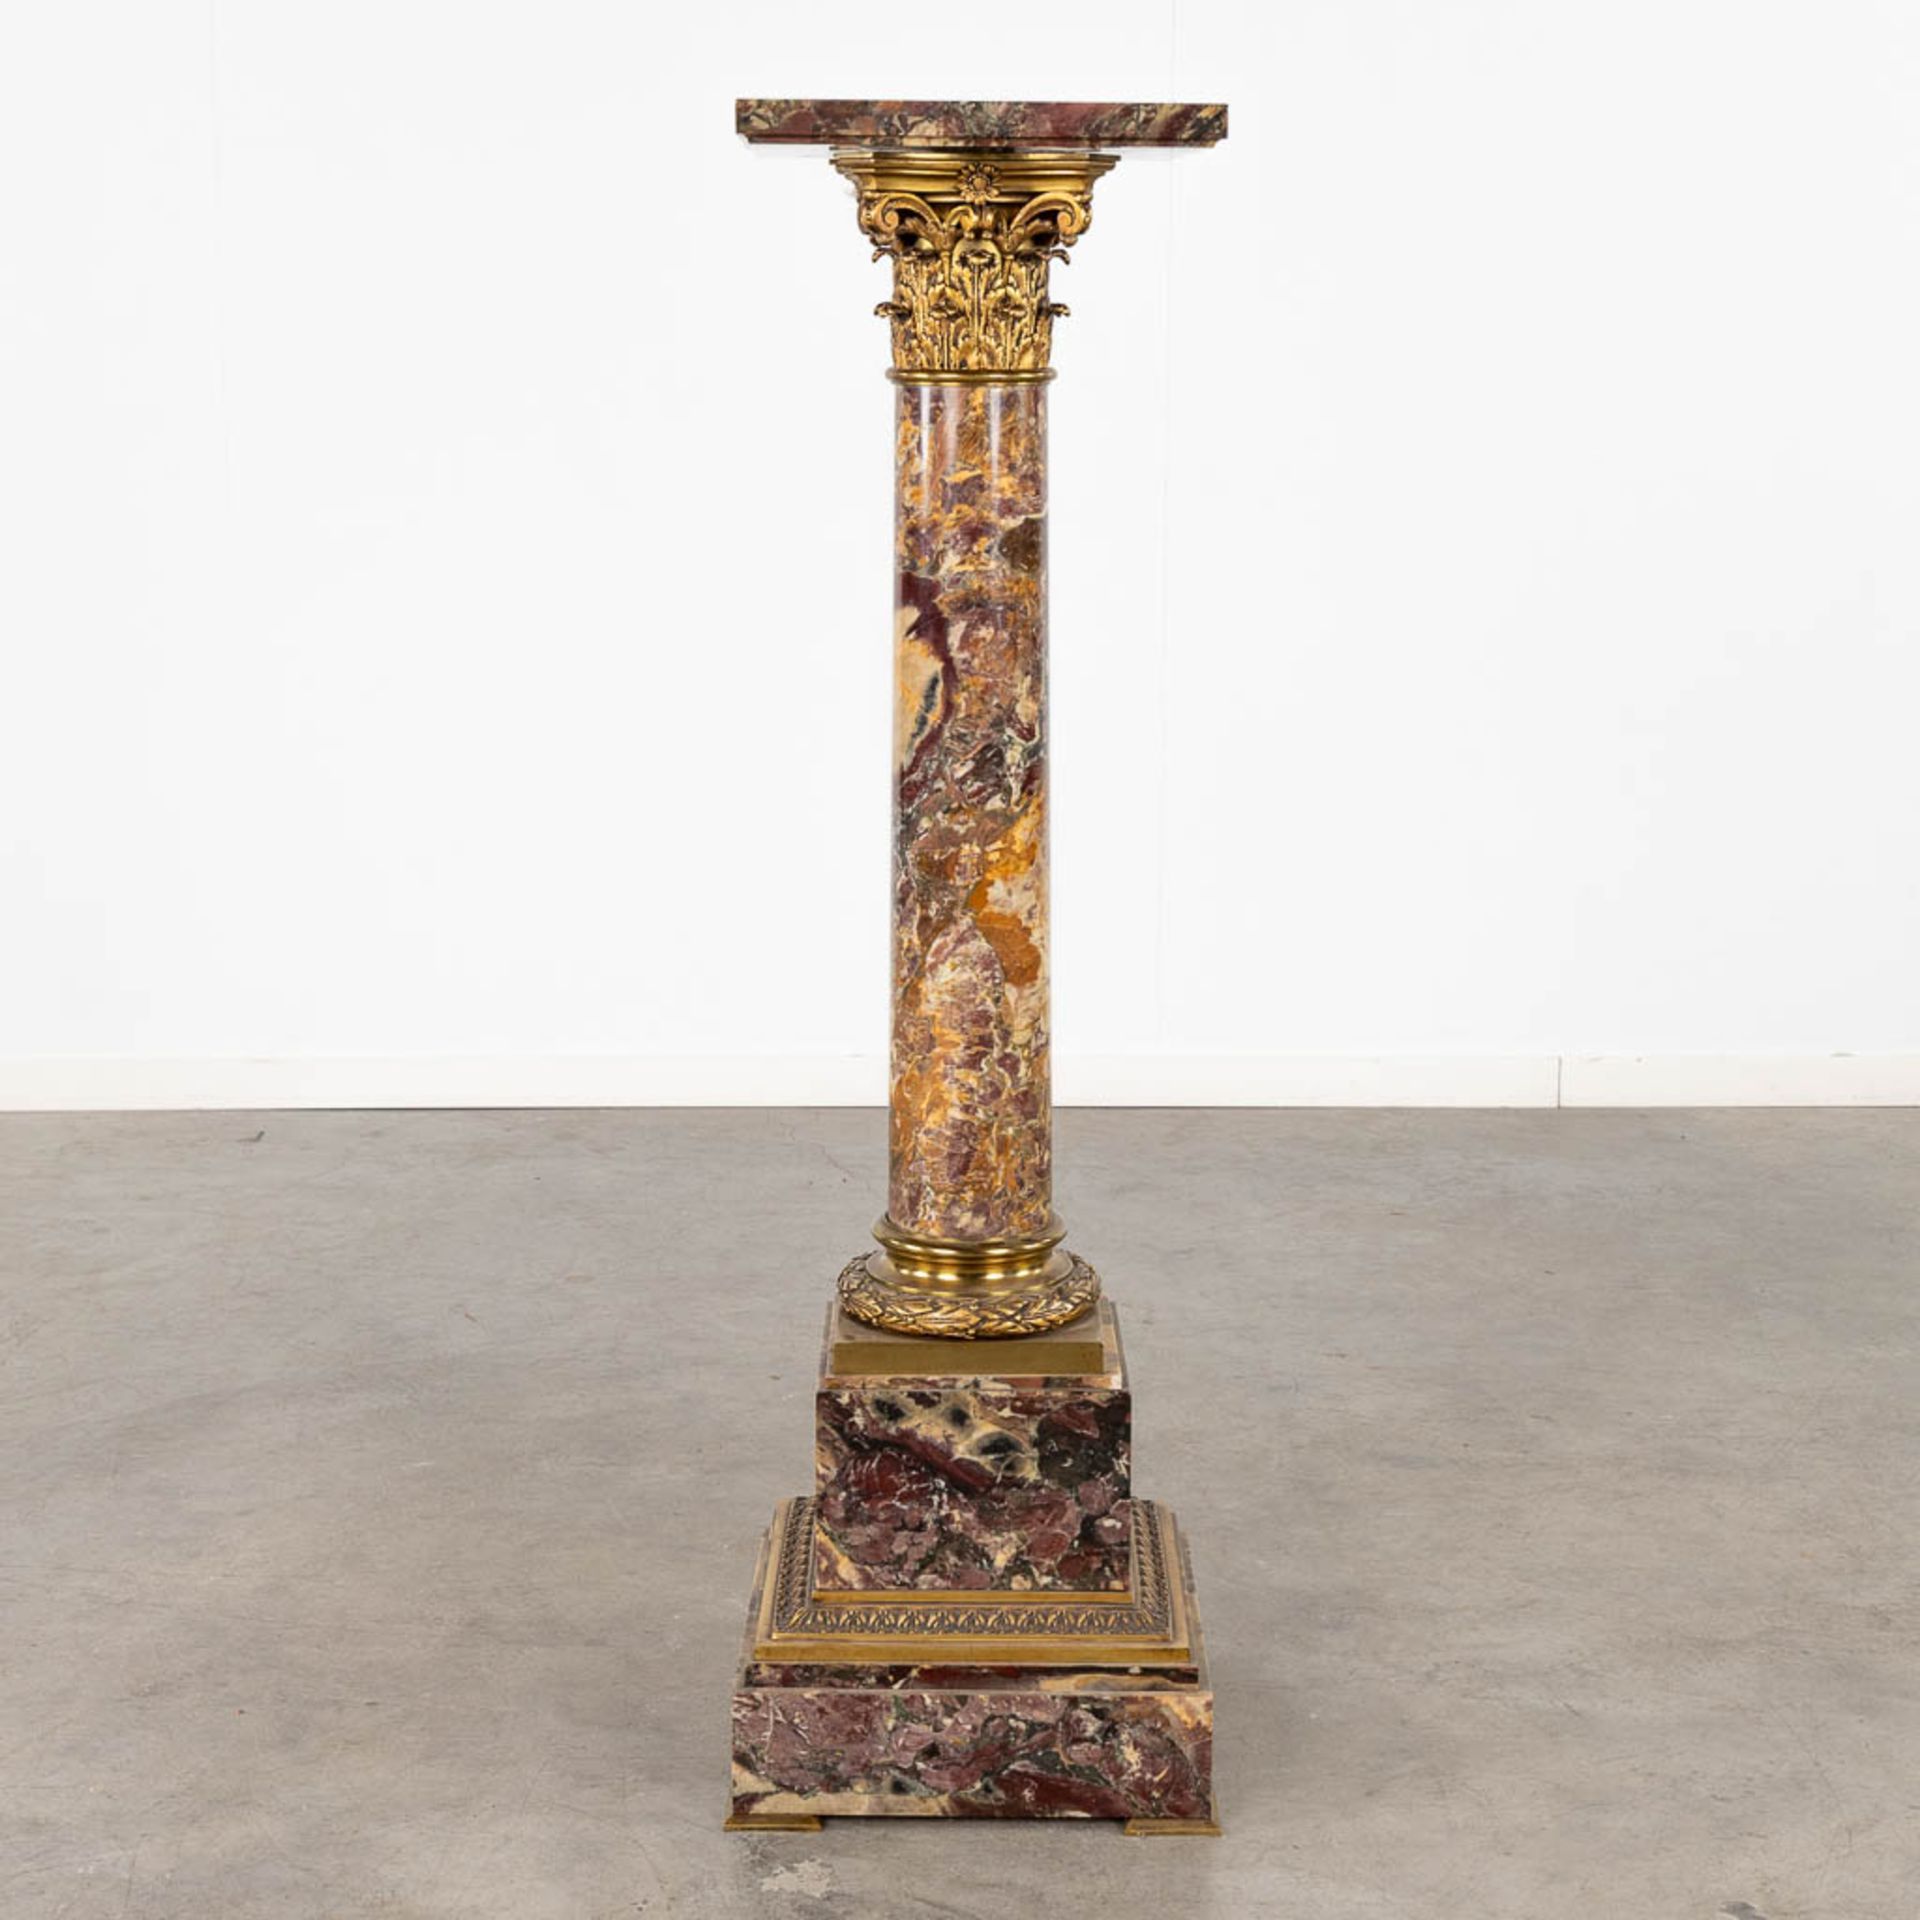 A pedestal, marble mounted with bronze in Corinthian style. Circa 1920. (D:35 x W:35 x H:120 cm) - Image 6 of 13